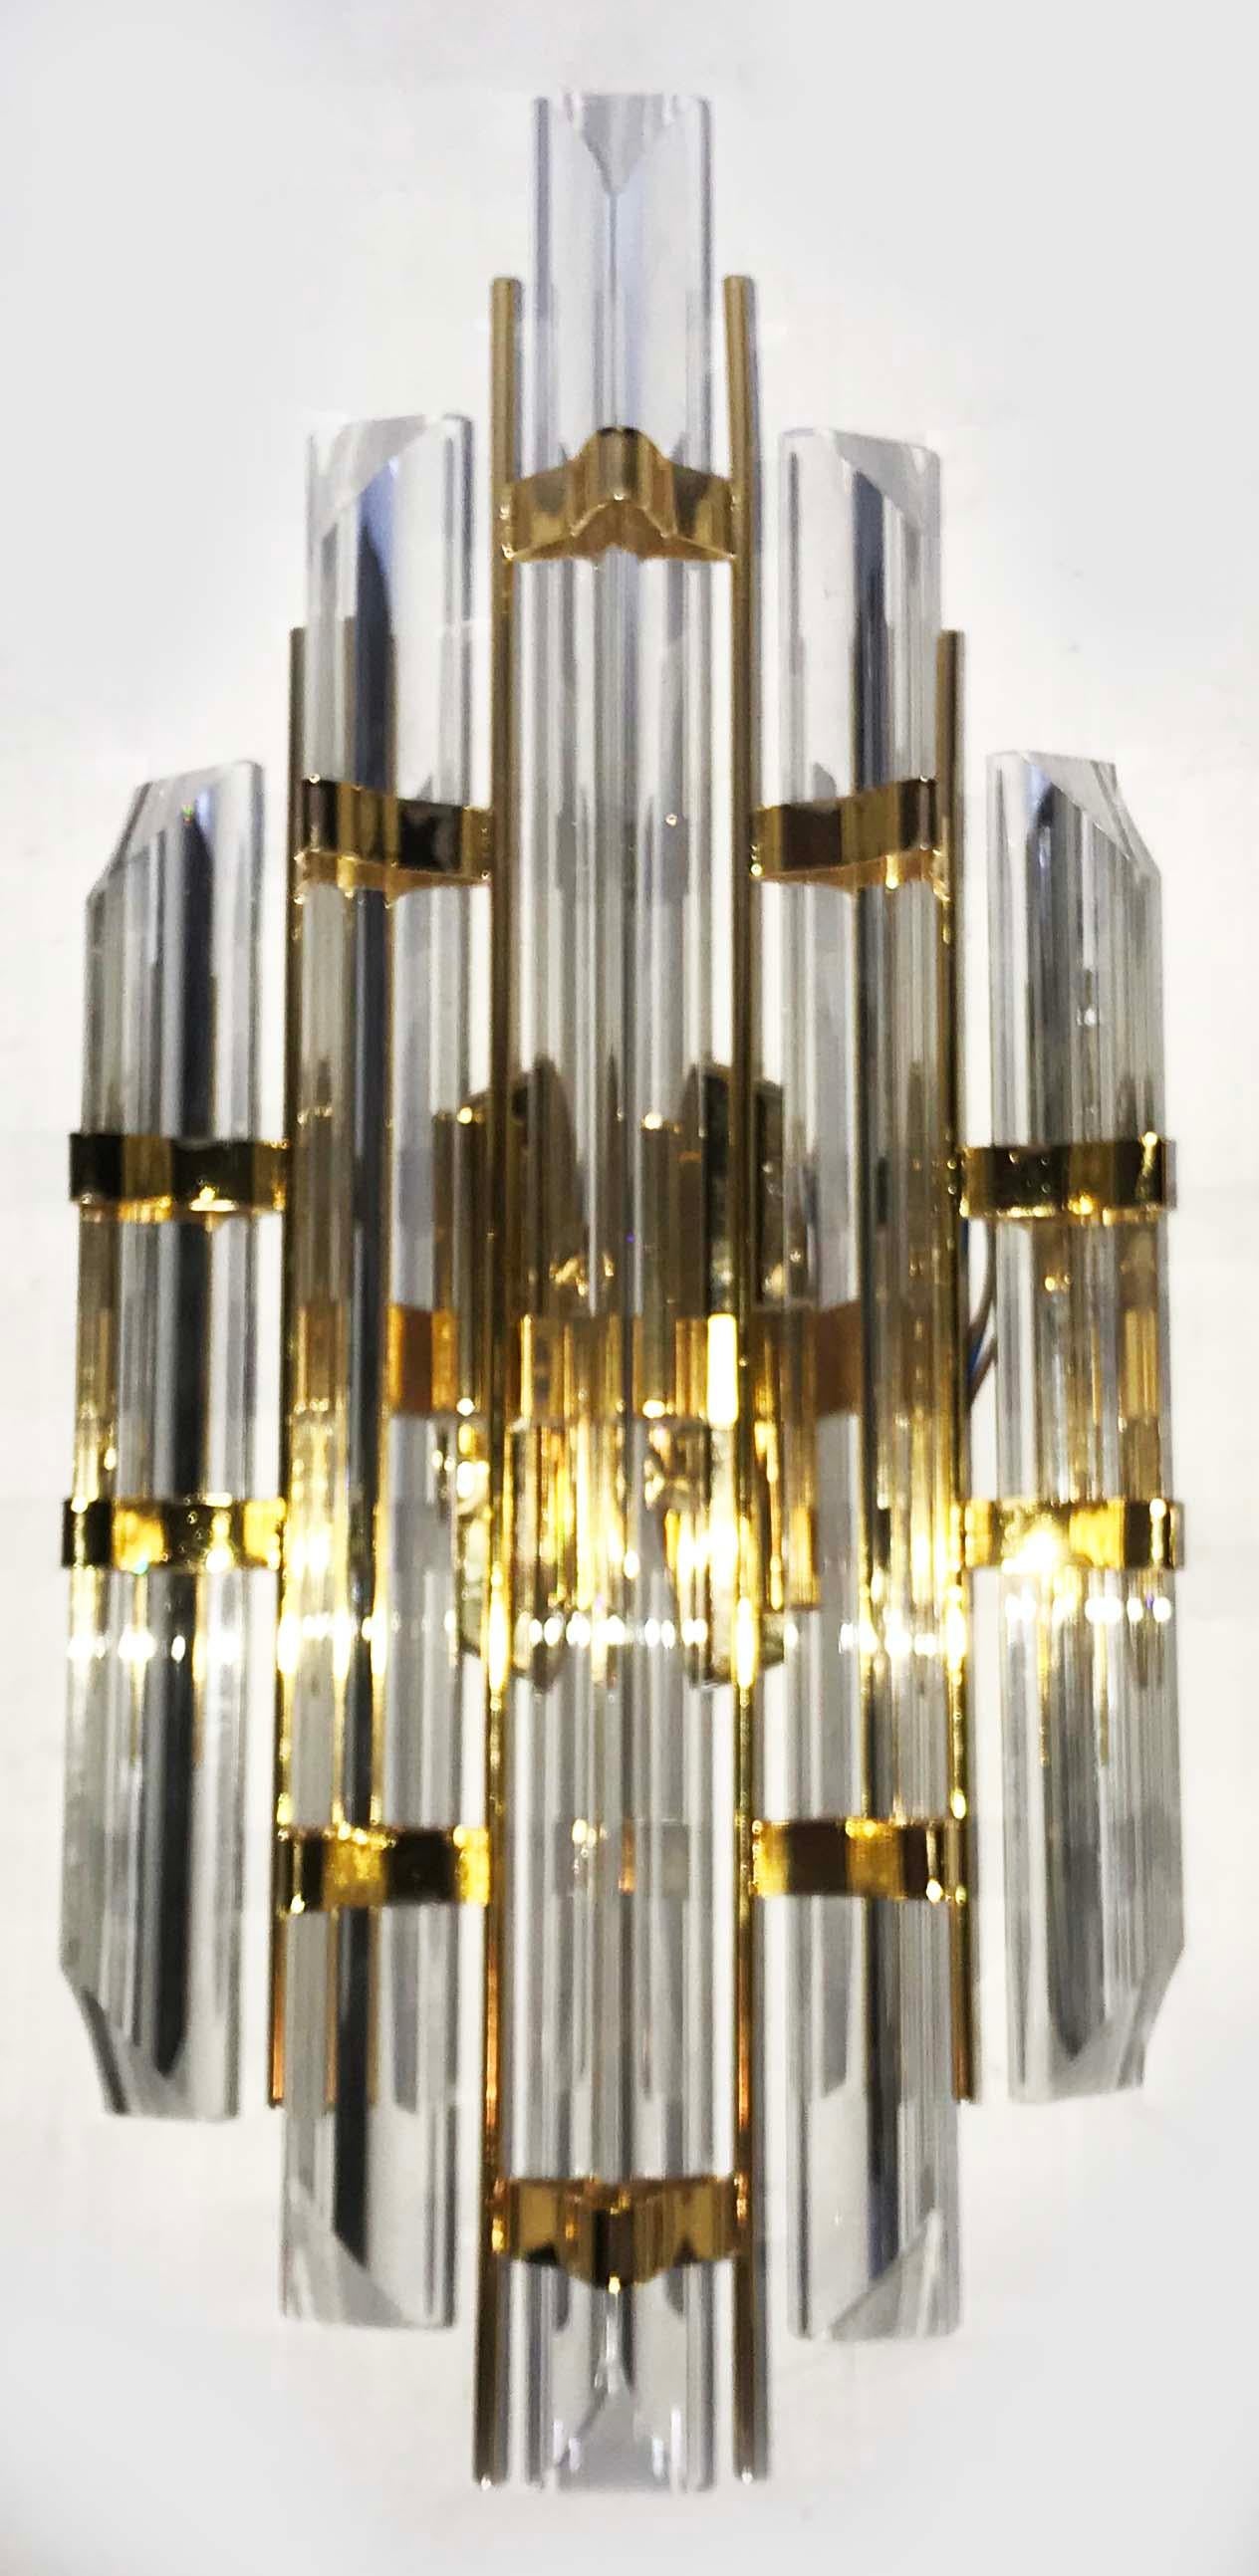 Superb pair of Murano glass sconces, 2 pairs available
2 lights per sconce, 60 watt max bulb
US wired and in working condition
Measures: Back plate 4.75 diameter.